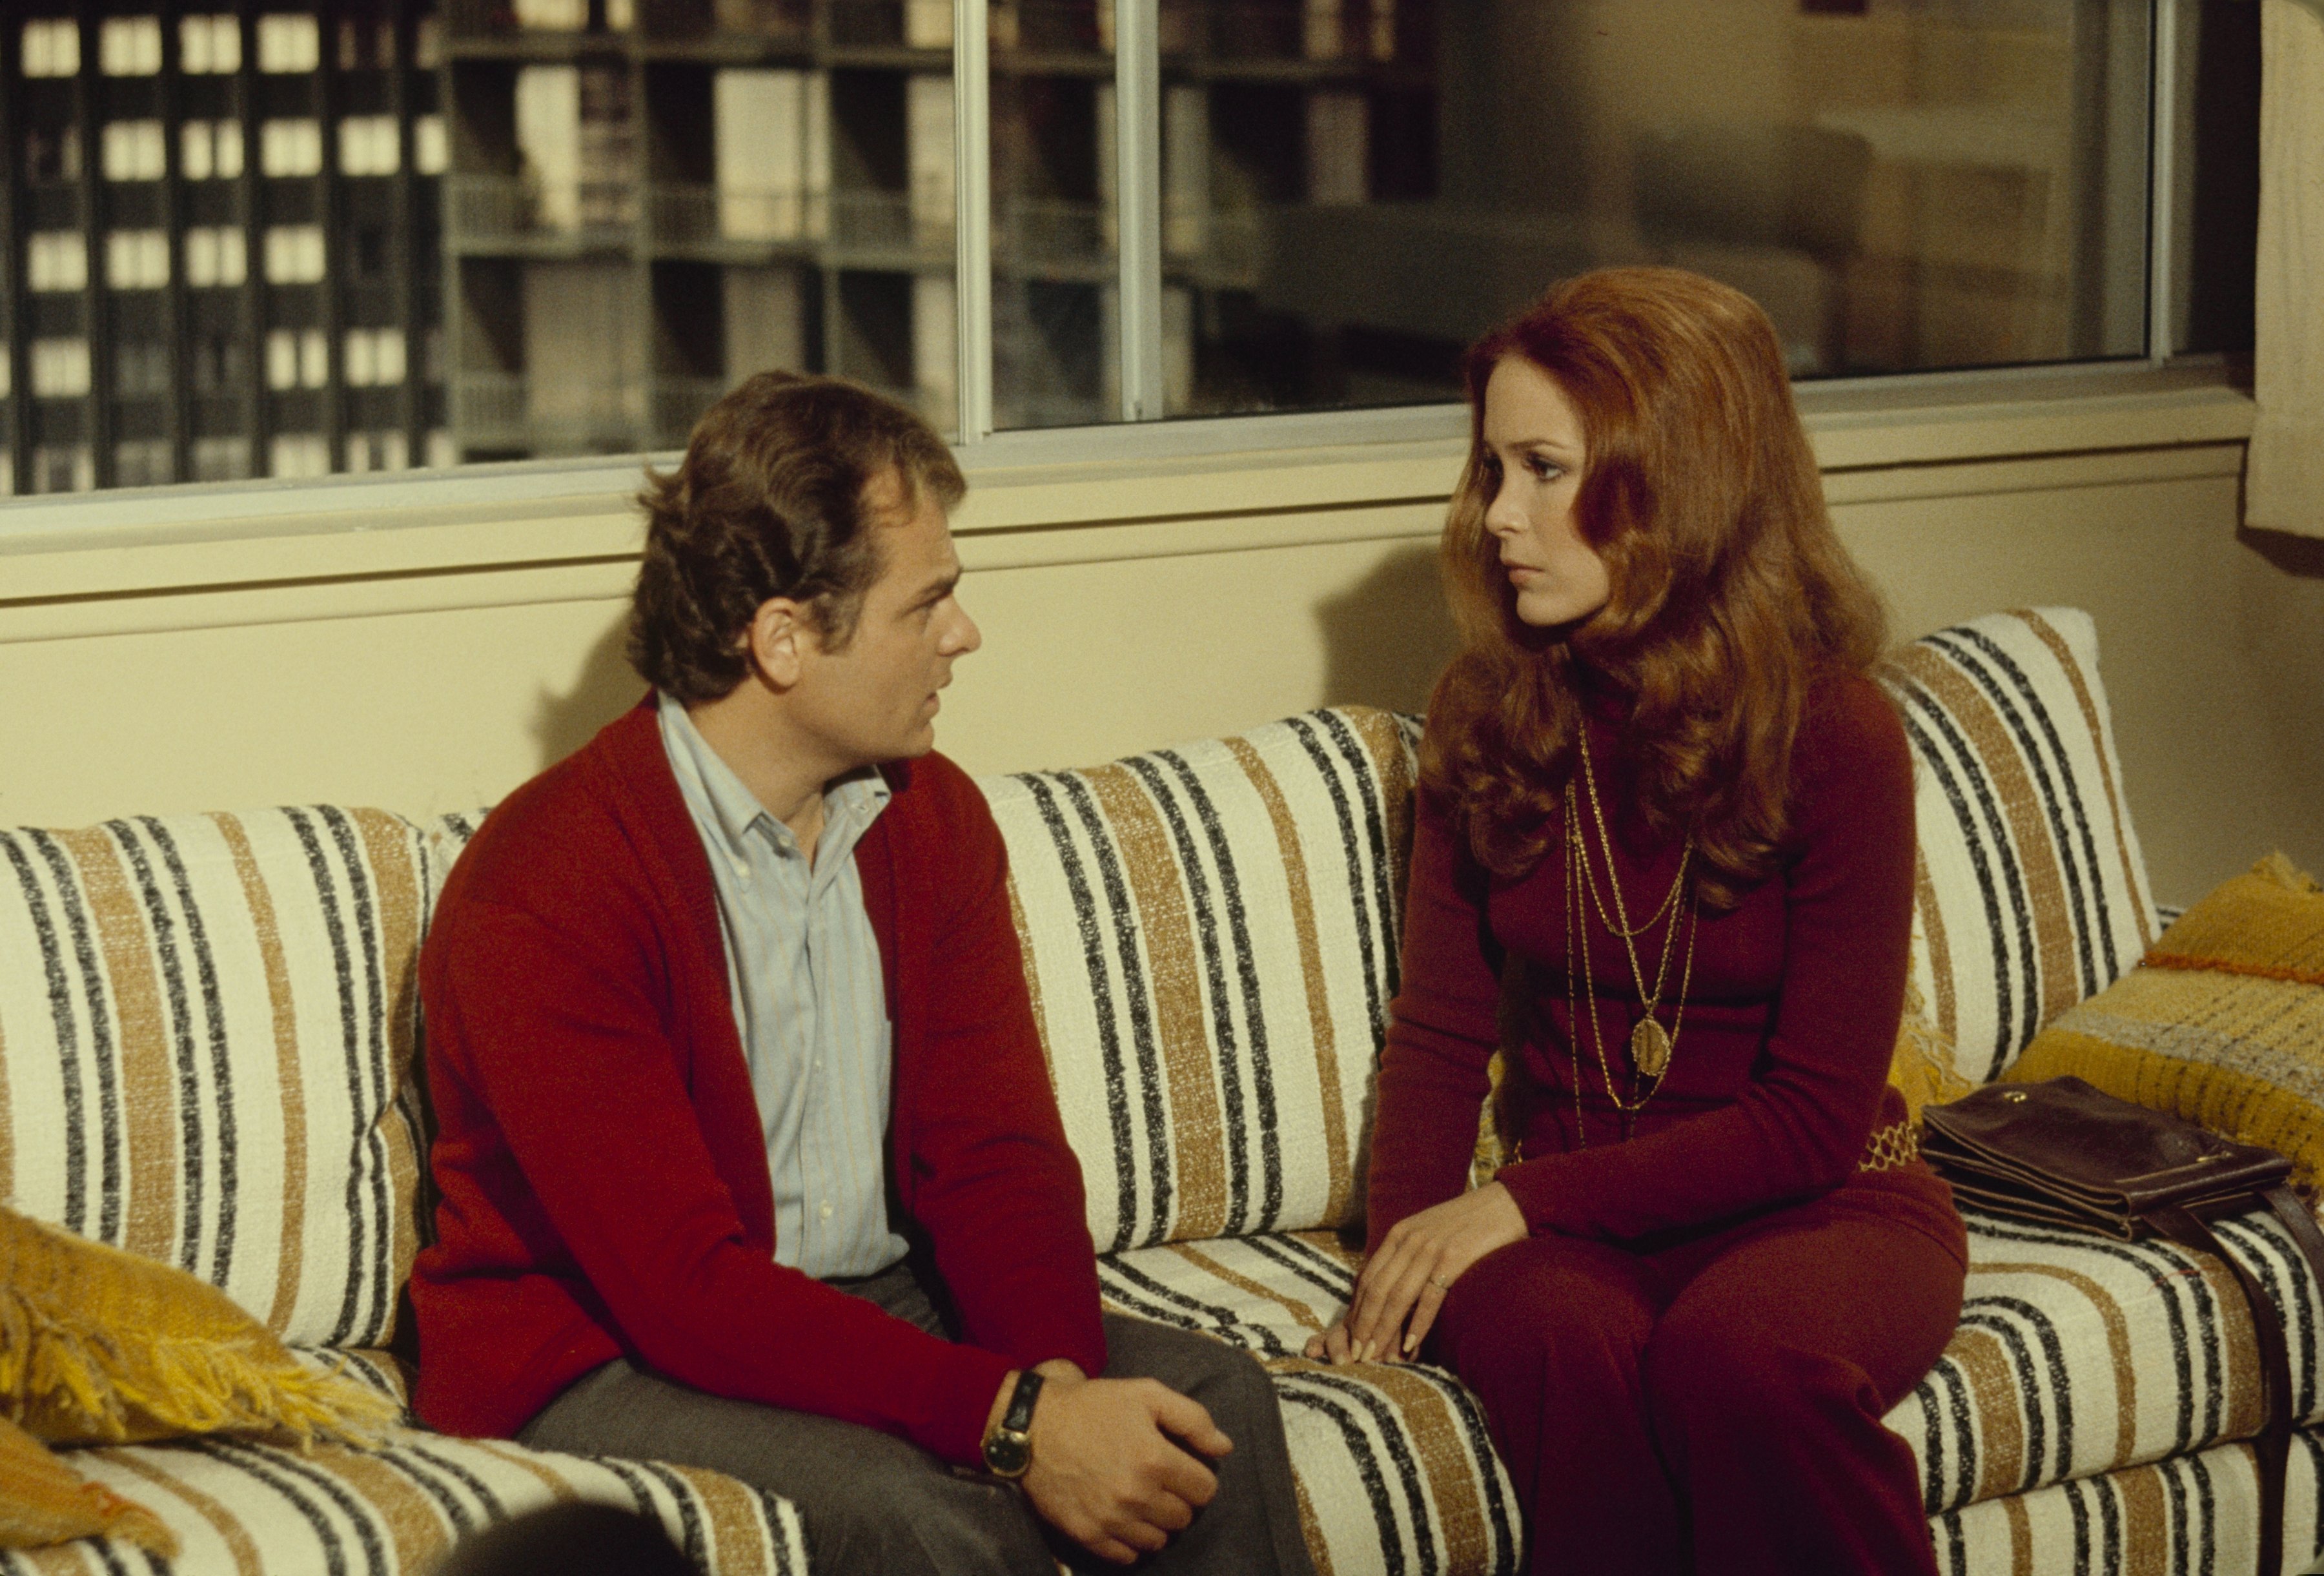 Gary Burghoff and Linda Henning in "Love American Style" in 1973 | Source: Getty Images